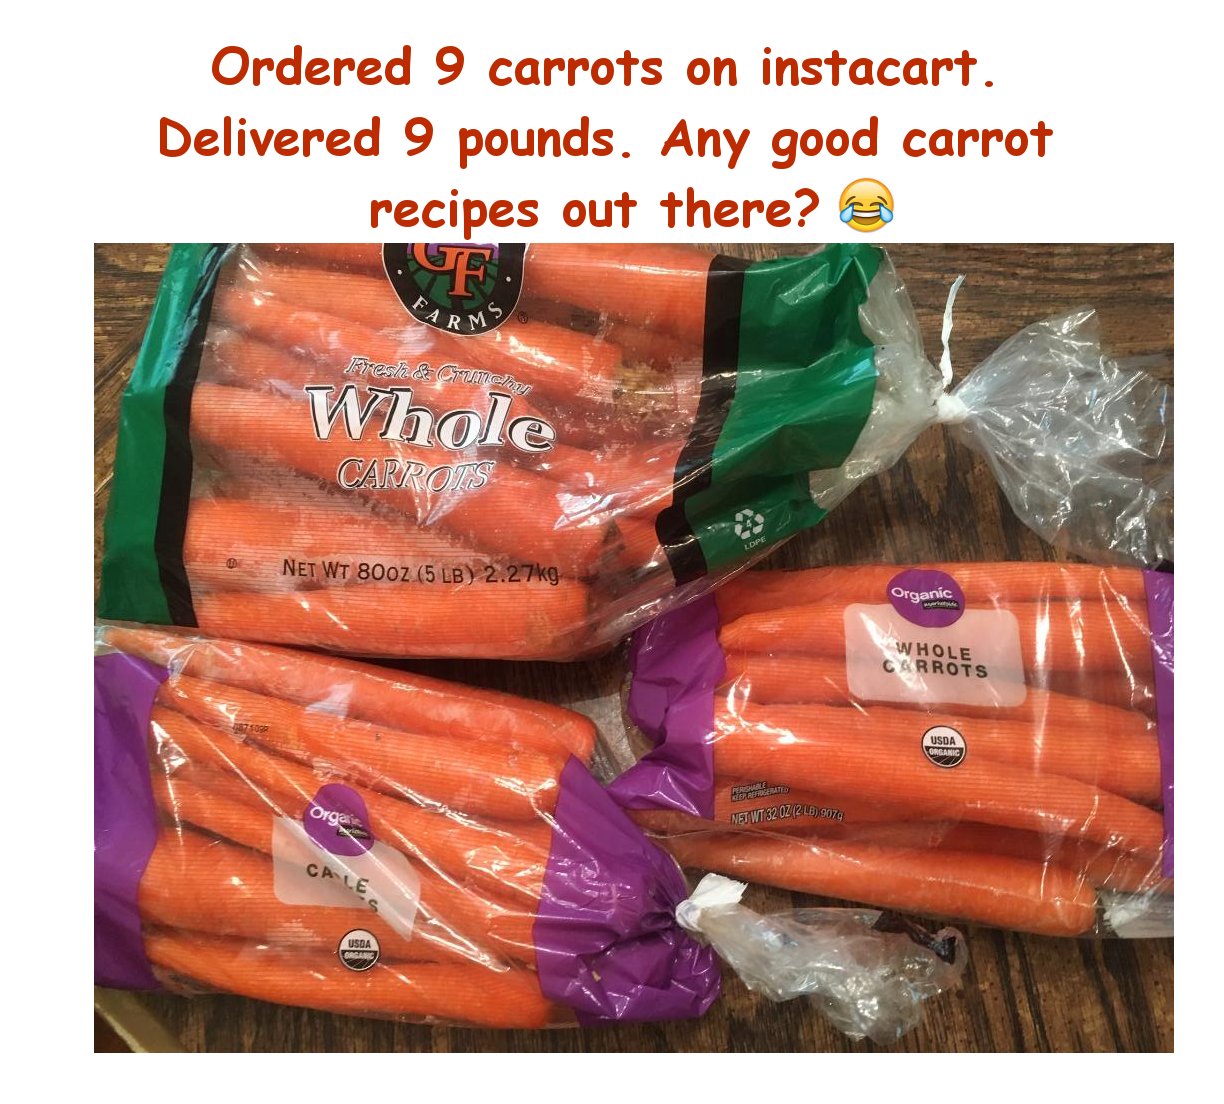 orange - Ordered 9 carrots on instacart. Delivered 9 pounds. Any good carrot recipes out there? F Farms Frese crumena Whole Carrieste Lope Net Wt 800Z 5 Lb g. Organic 9 Whole Carrots Usda Organic Berate Pha The Orga Net Wt 32 Oz 218 9076 Cale Usda Ces